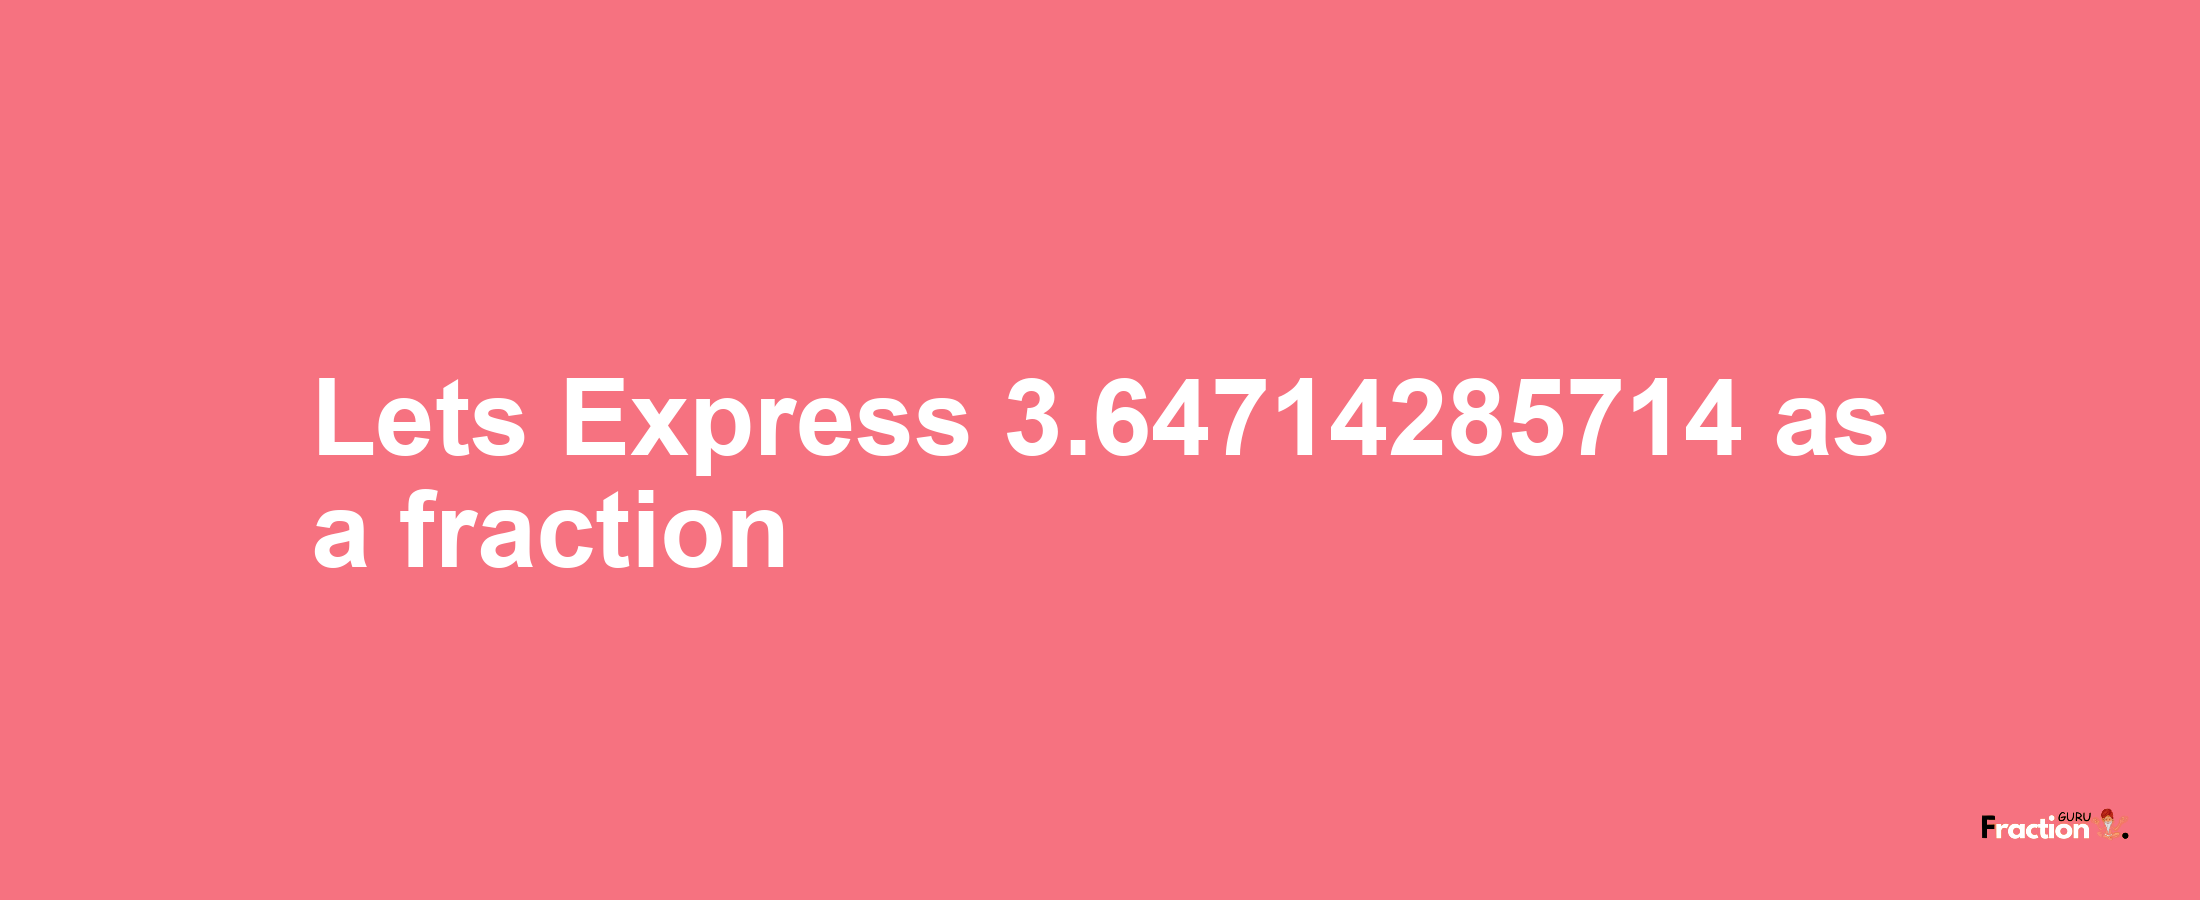 Lets Express 3.64714285714 as afraction